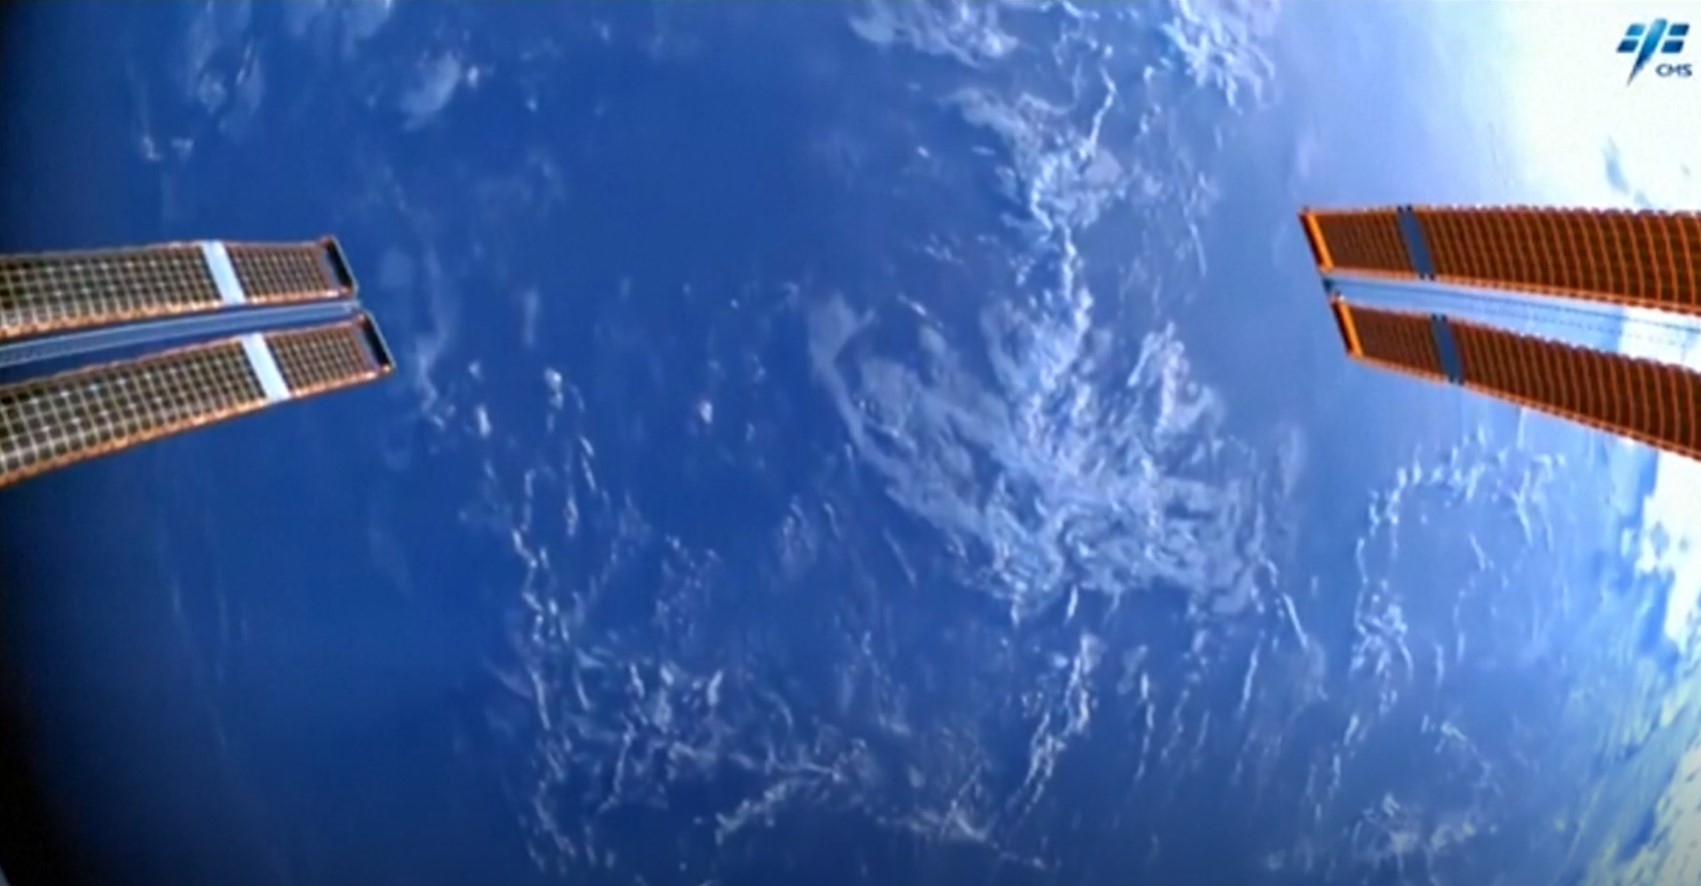 See Earth from space in stunning video from China's Tiangong space station